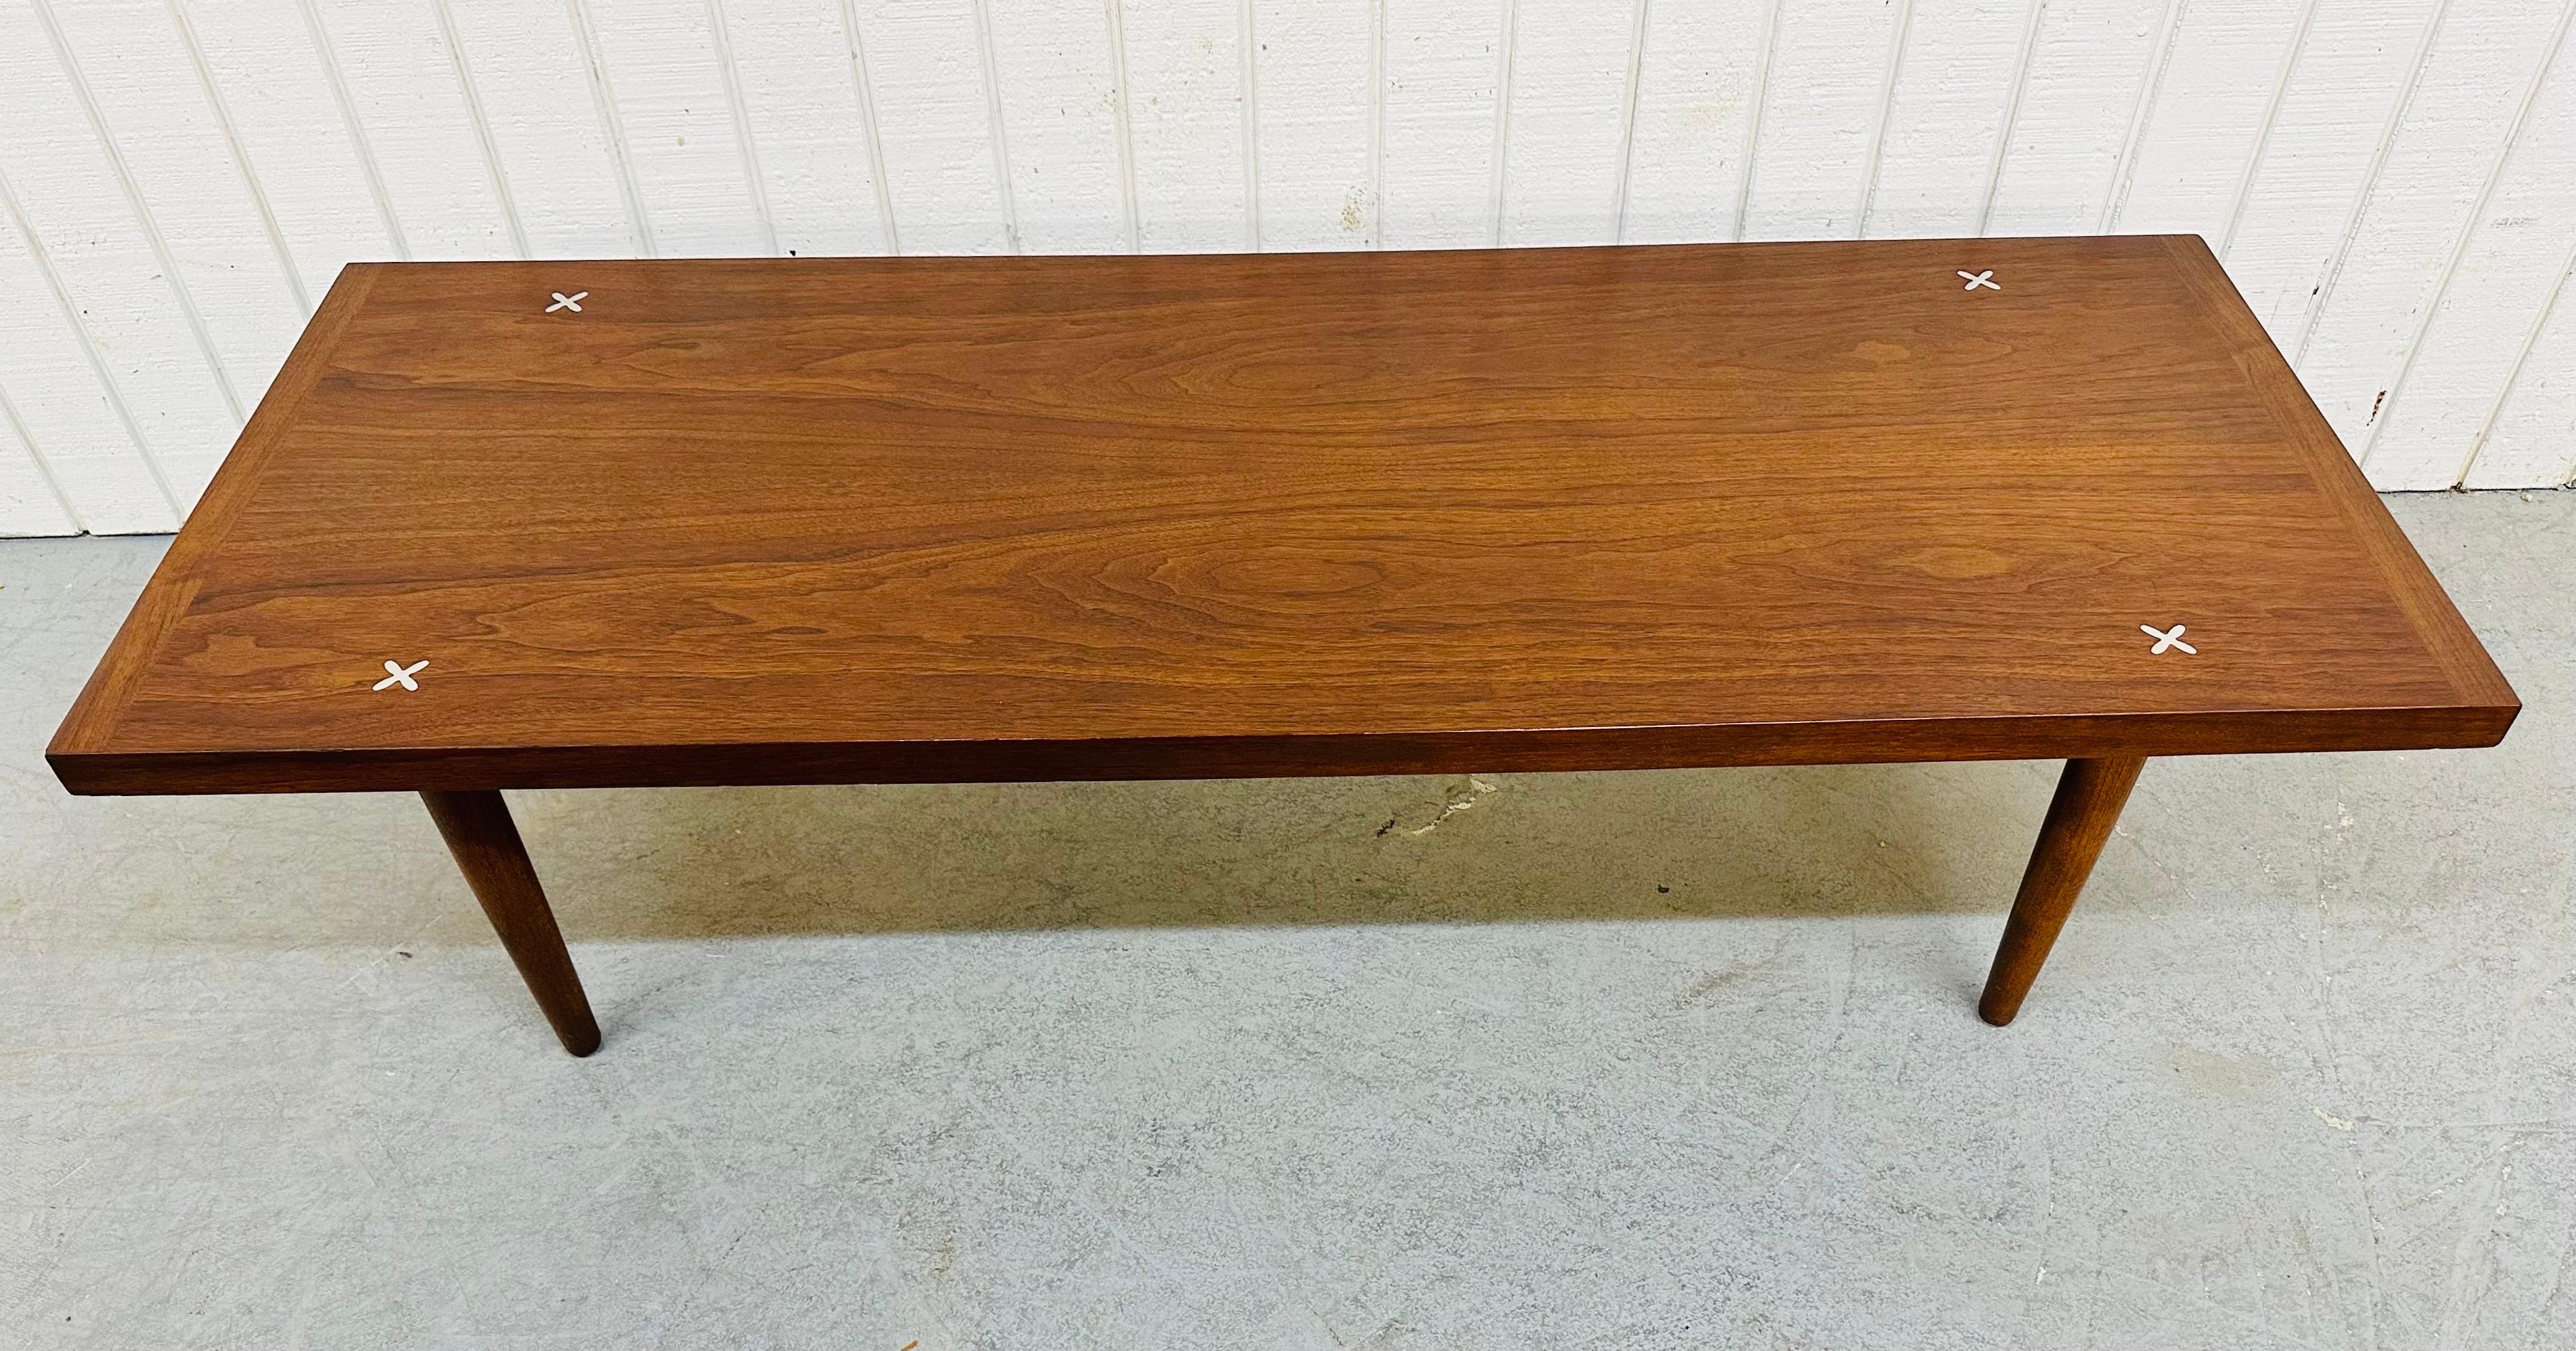 This listing is for a Mid-Century Modern American of Martinsville Walnut Coffee Table. Featuring a thick rectangular walnut top, inlaid silver cross at each corner, and four removable legs. This is an exceptional combination of quality and design by